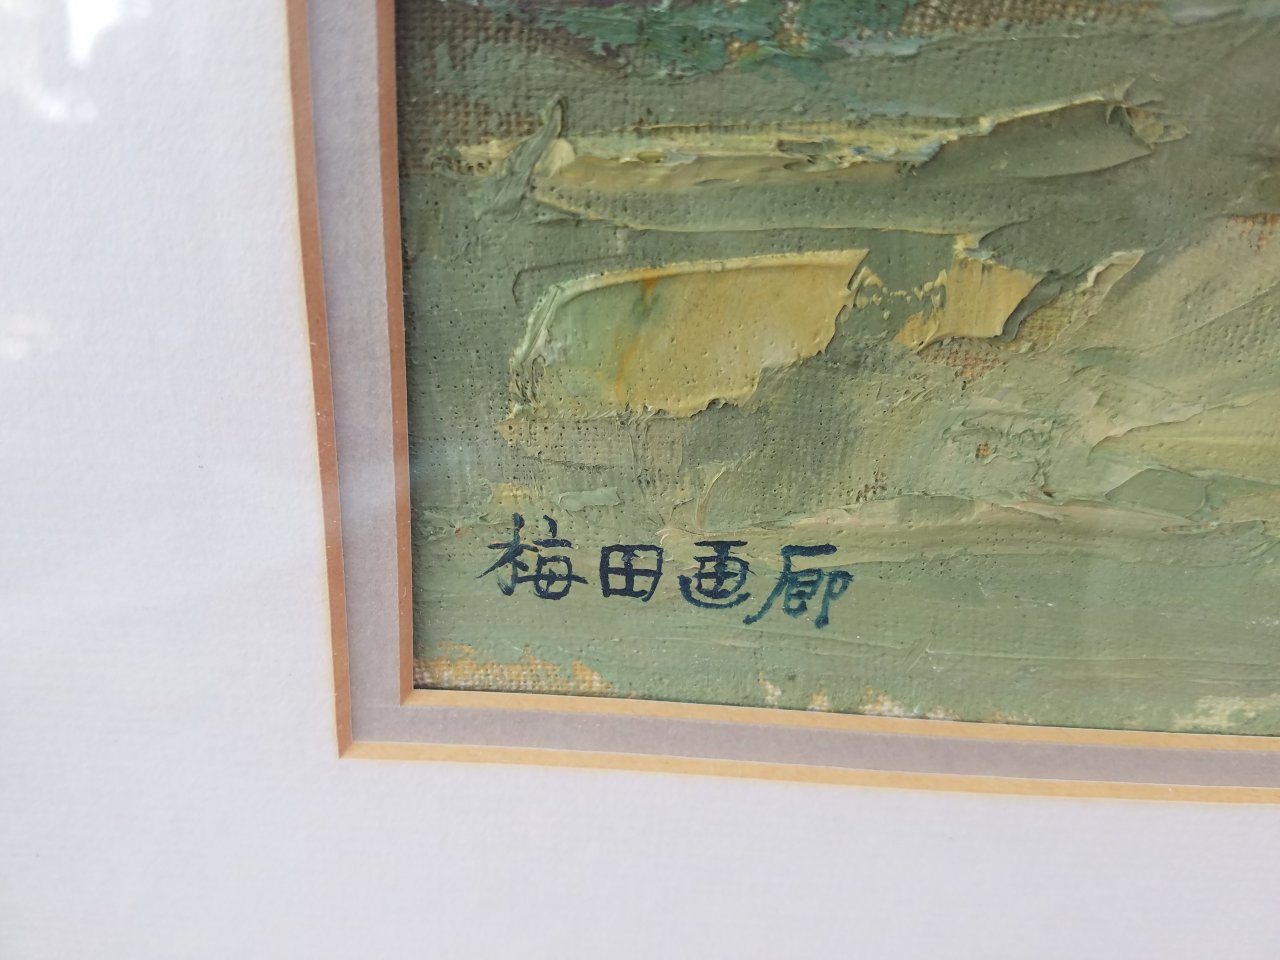 Chinese Painting Id Help Please Artifact Collectors